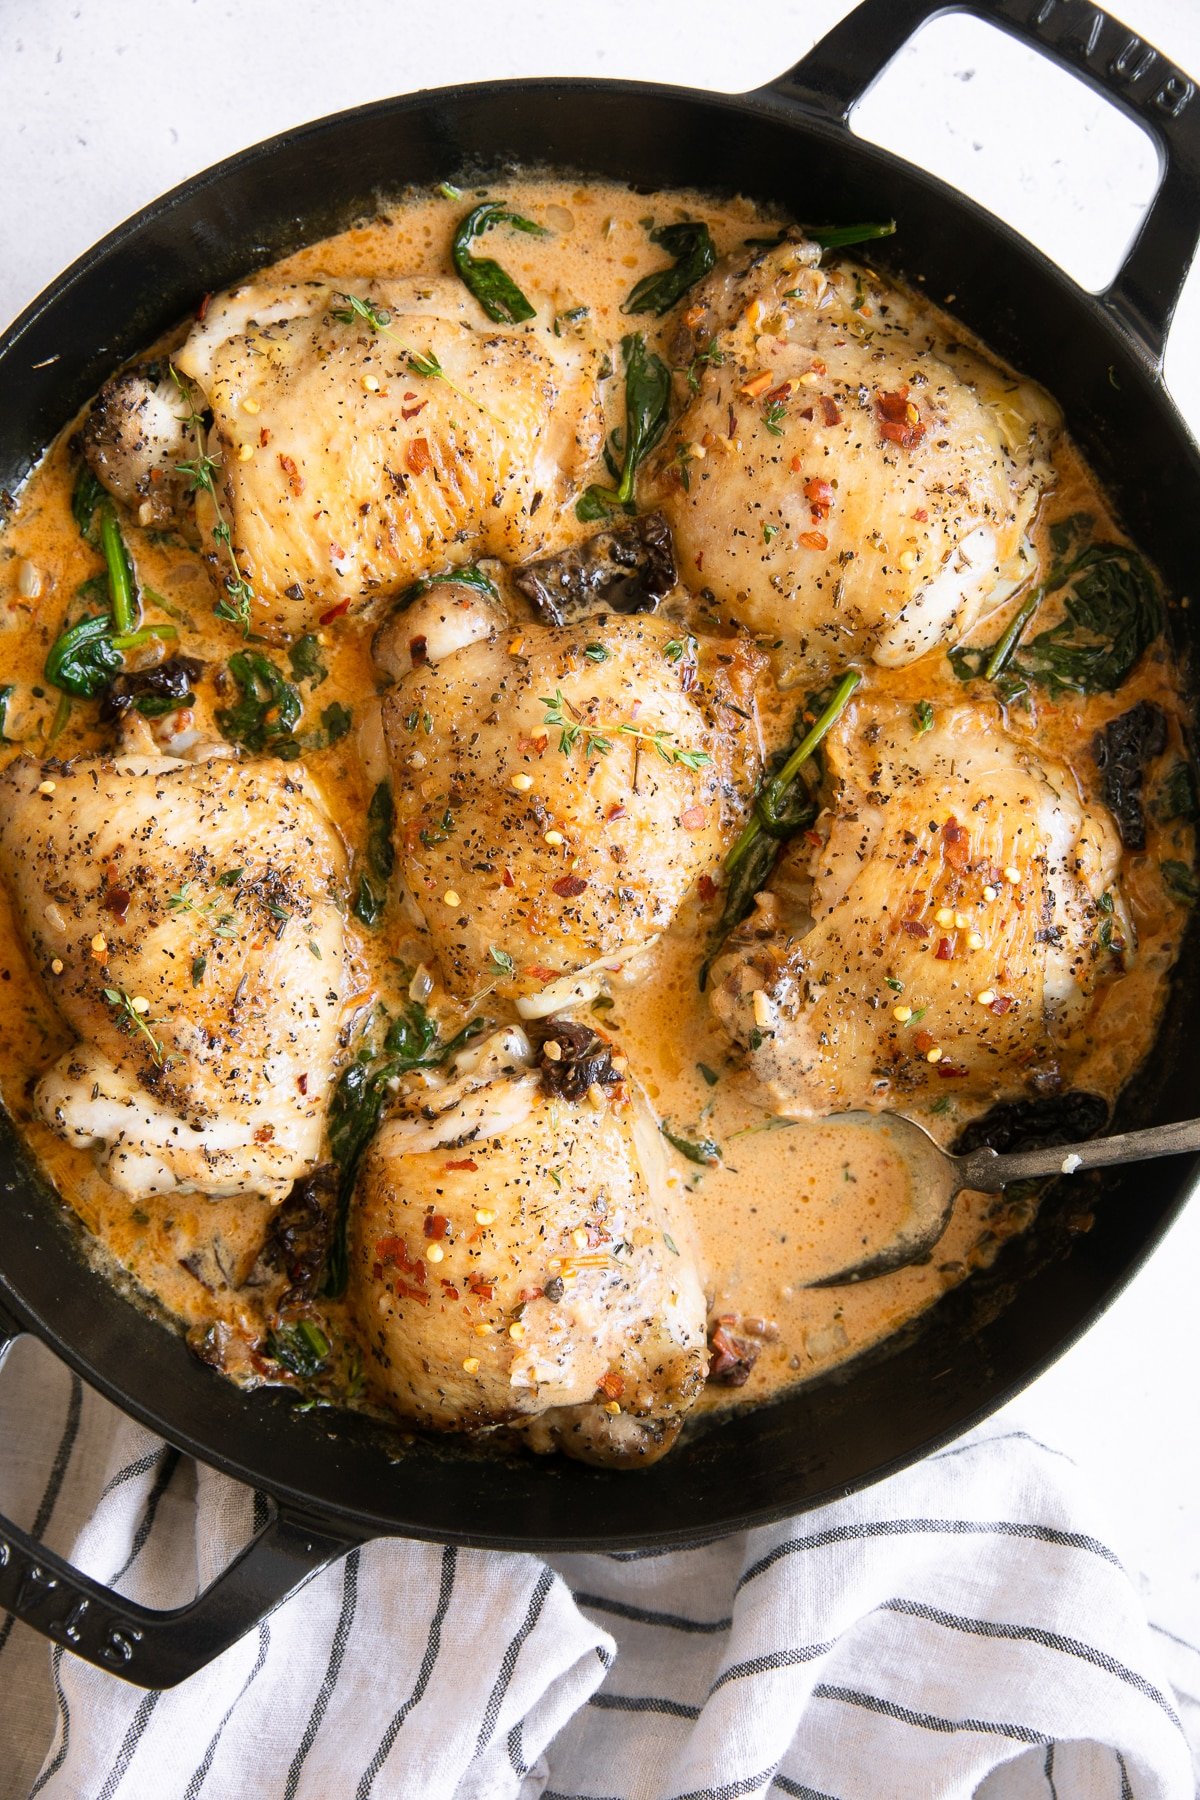 Overhead image of a large skillet filled with 6 cooked chicken thighs in a creamy tuscan sauce with sundried tomatoes and spinach.